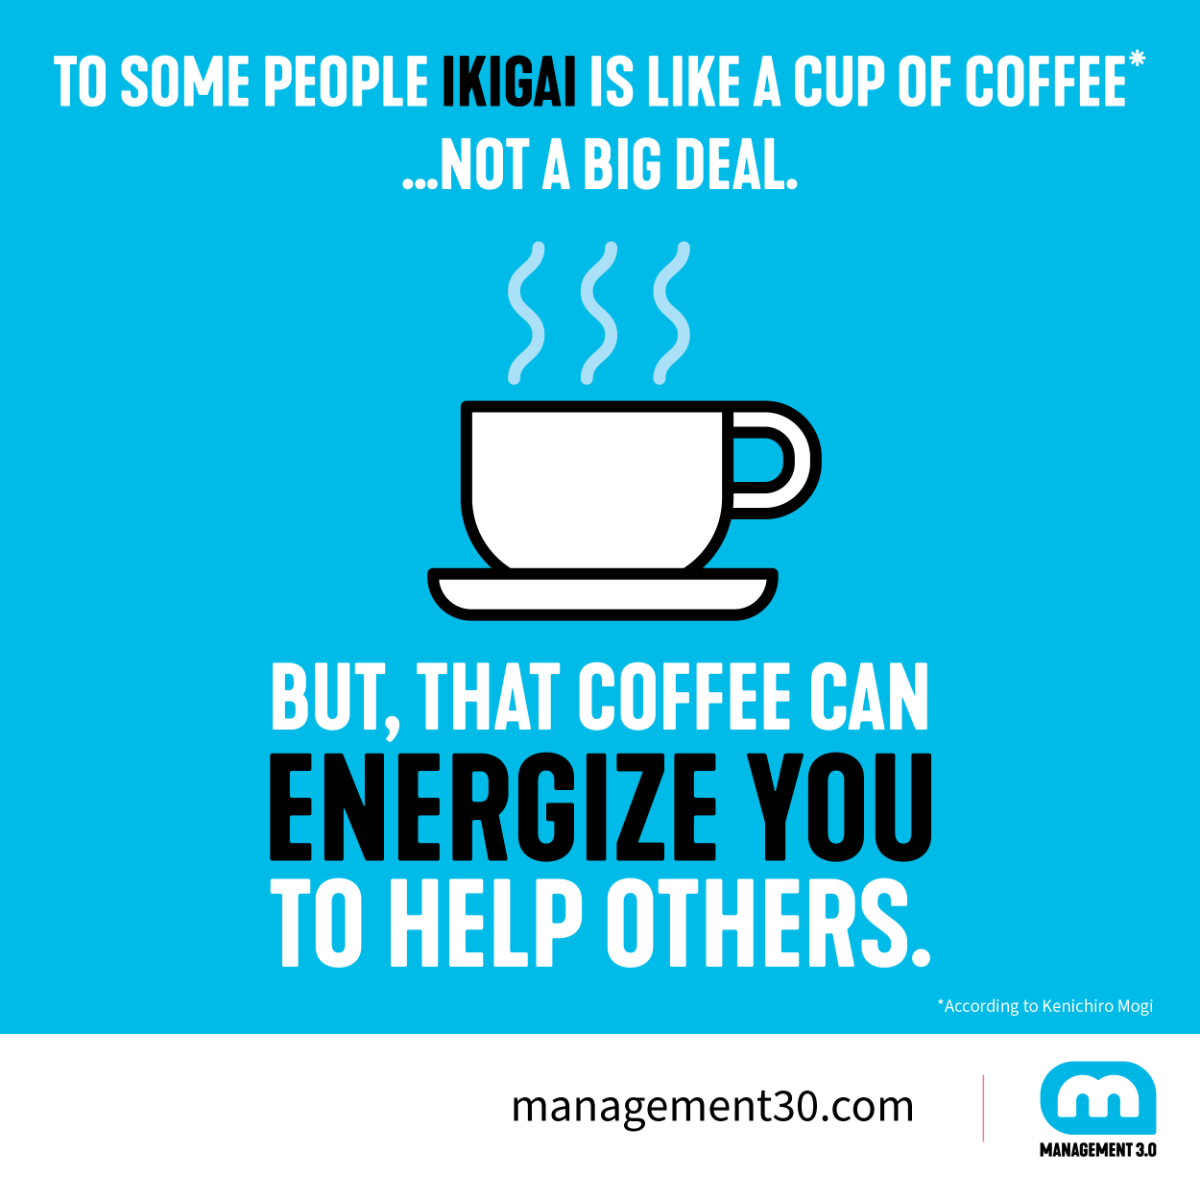 Some people think their IKIGAI is a cup of coffee, not a big thing that makes life worth living. But that coffee can energize you to help others.